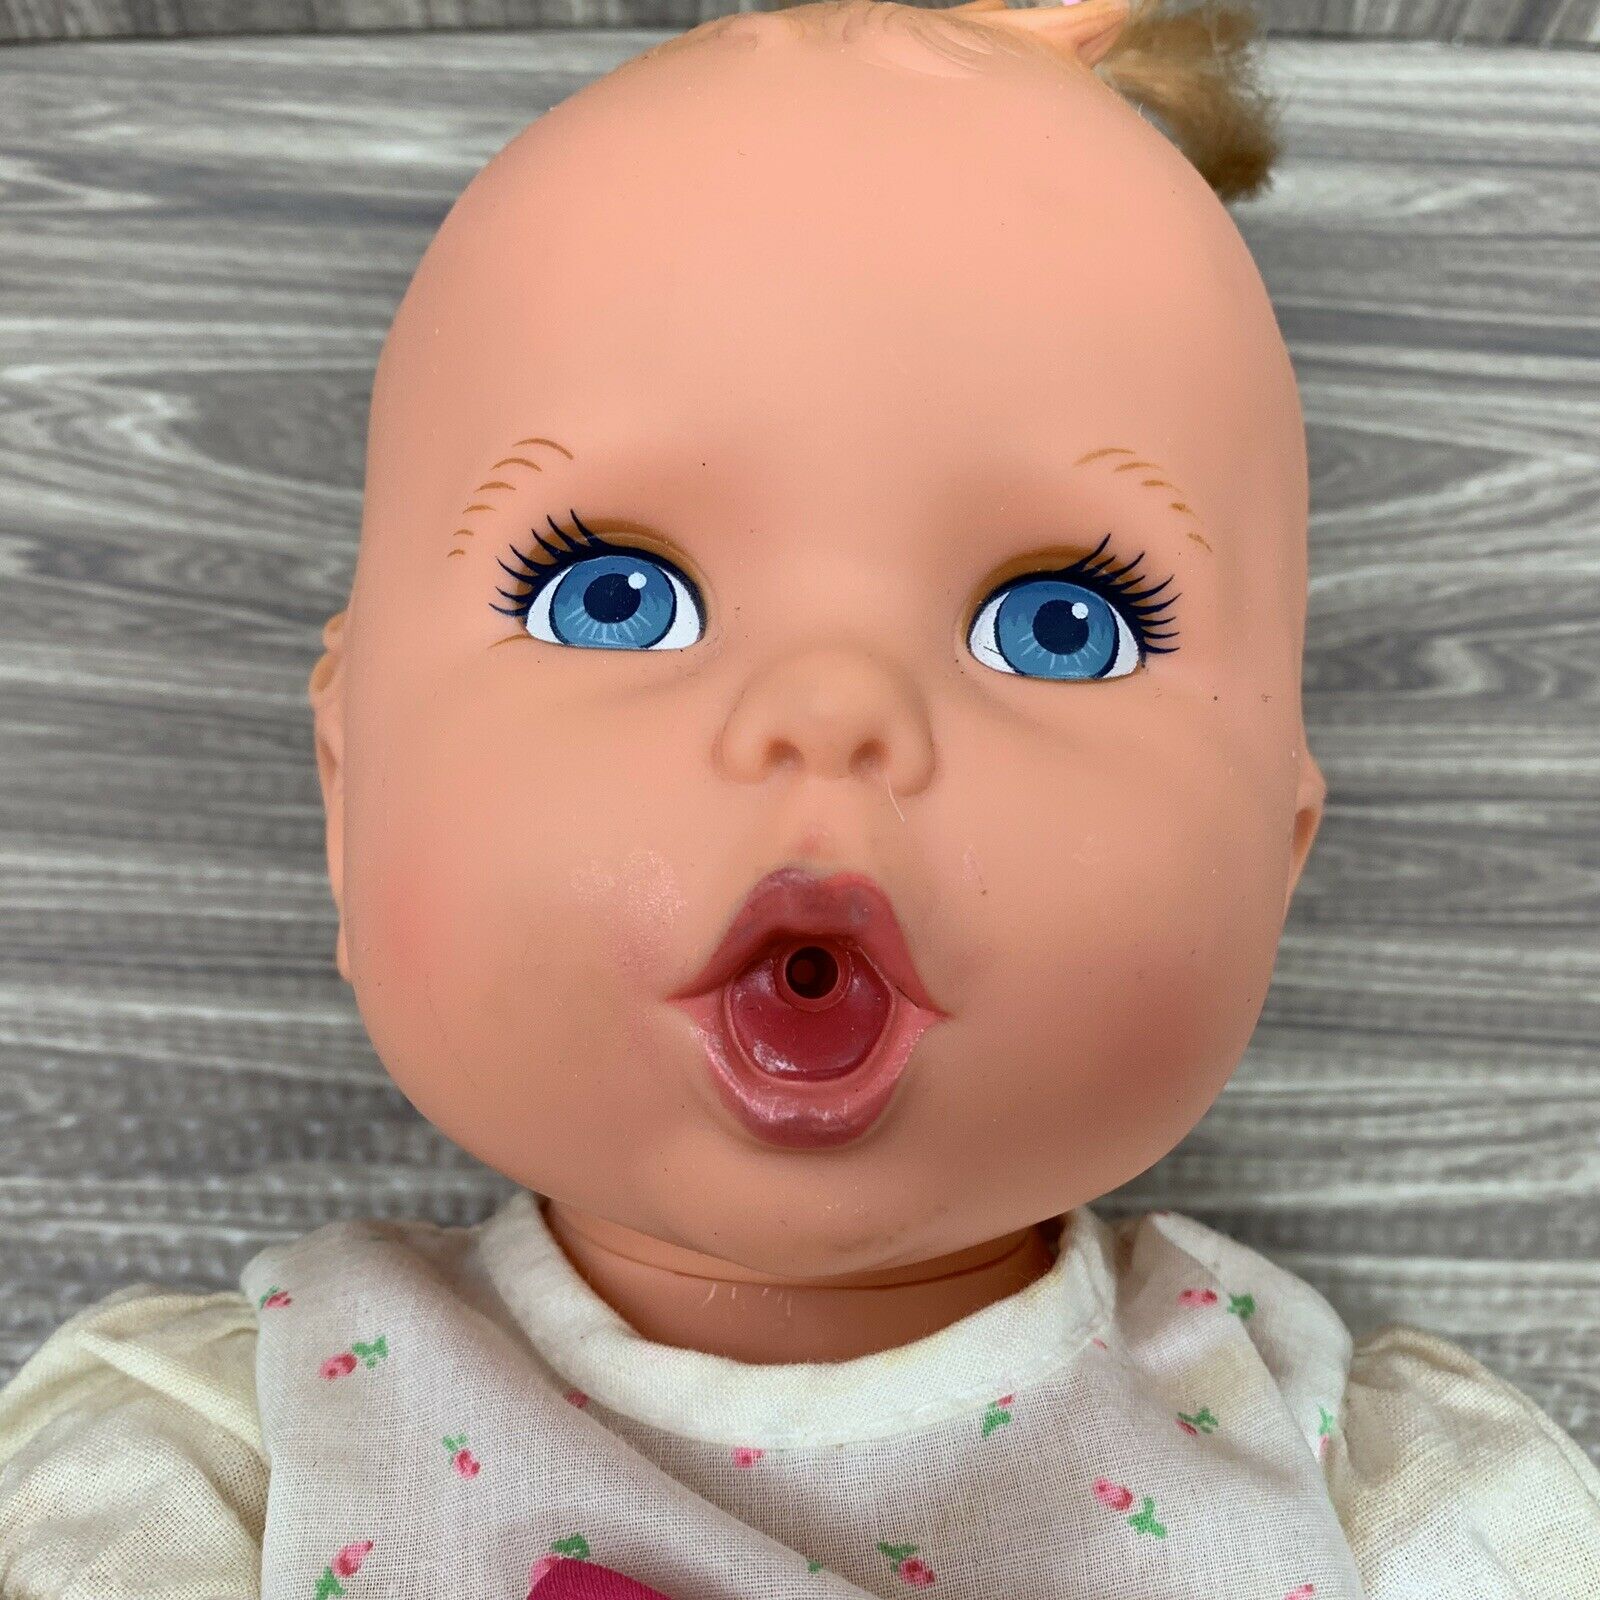 Vintage Gerber Baby Doll By Toy Biz 15 Inch Blue Eyes Bit Of Hair Poseable 1994